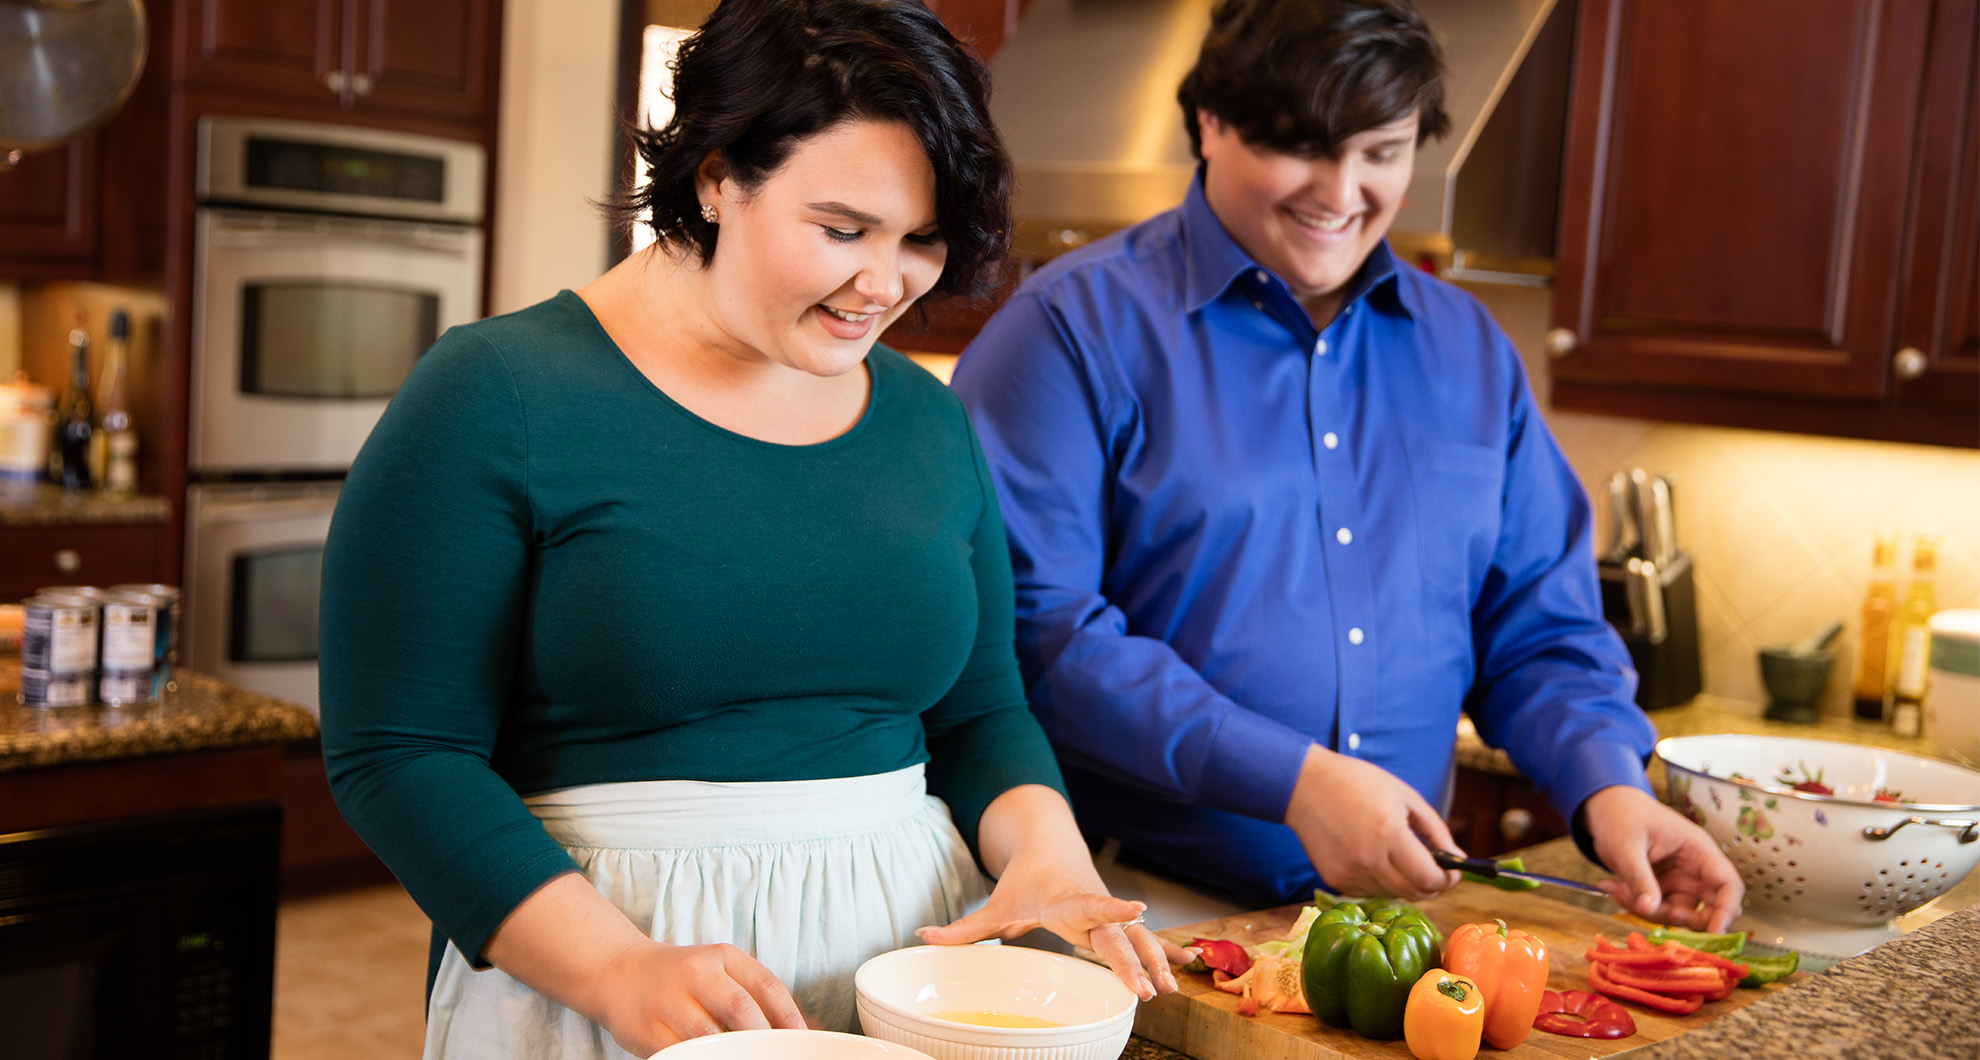 <p>A new study by University of Florida researchers found patients need continued support to help them maintain weight loss and other health benefits of bariatric surgery. Photo credit: Obesity Action Coalition.</p>